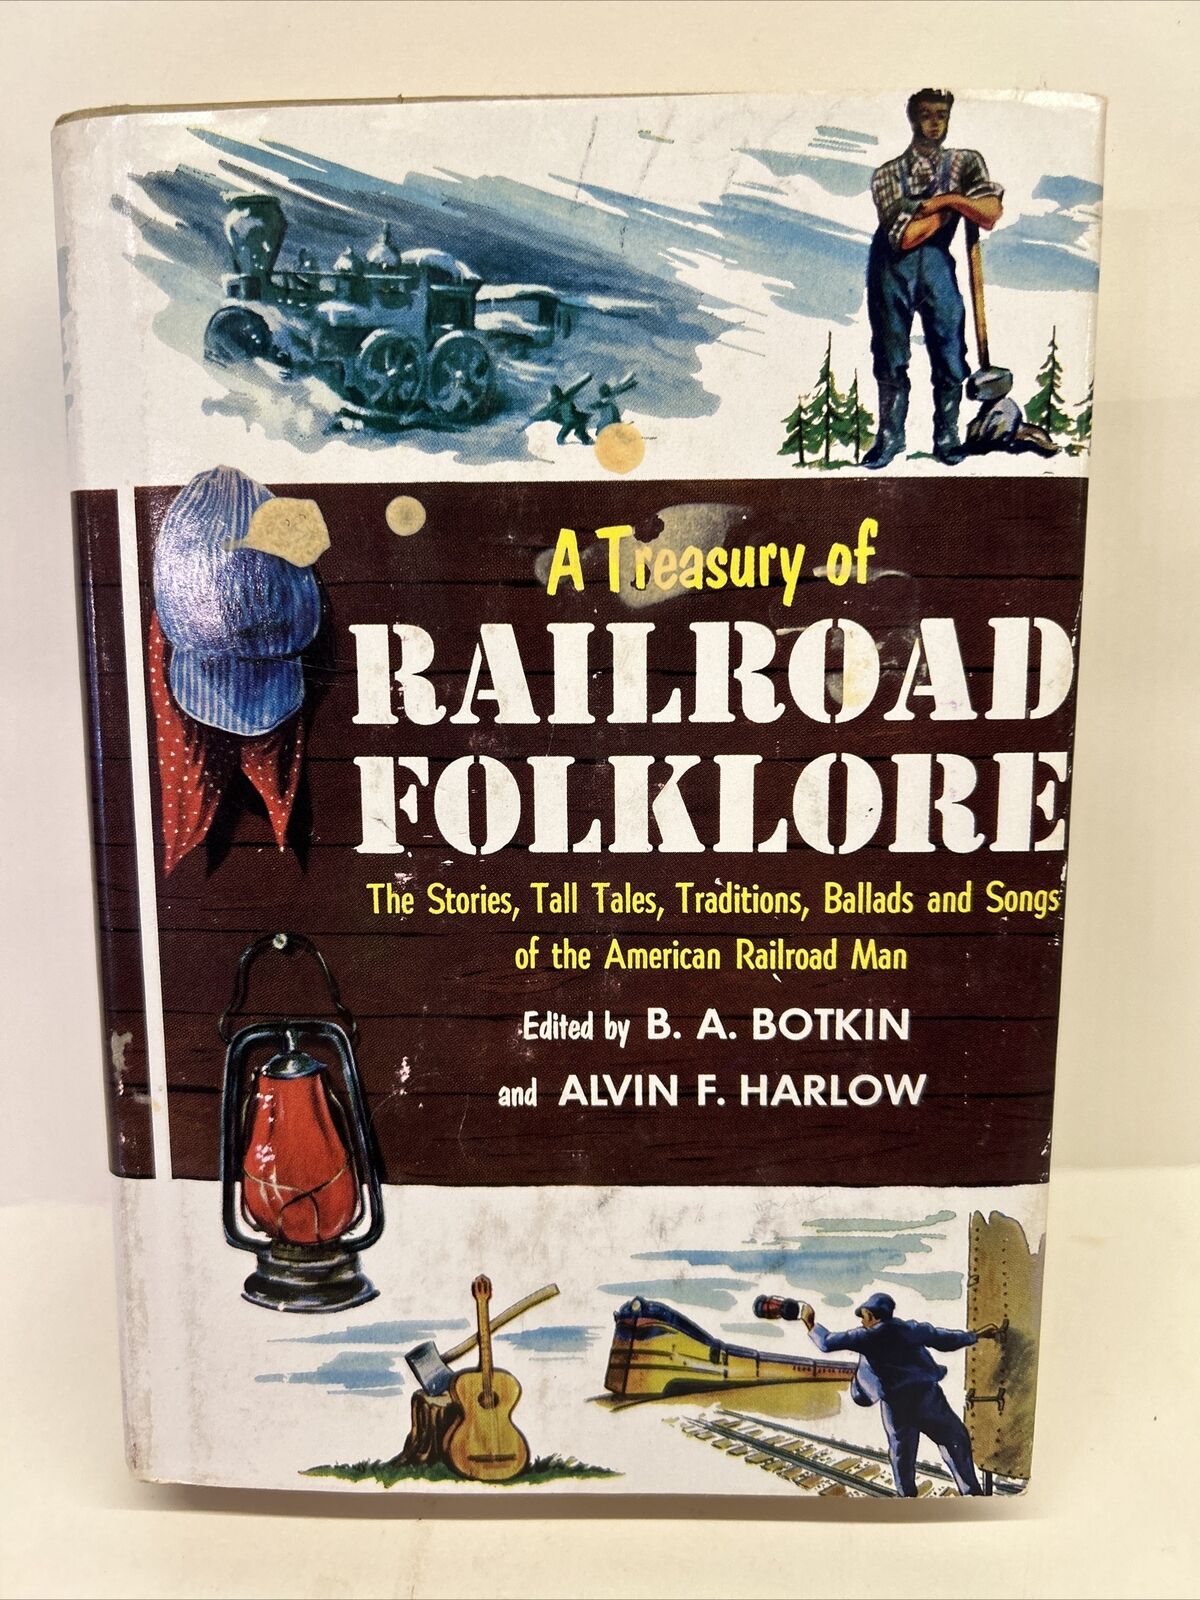 A Treasury Of Railroad Folklore by Botkin and Harlow VTG Stories, Tall Tales